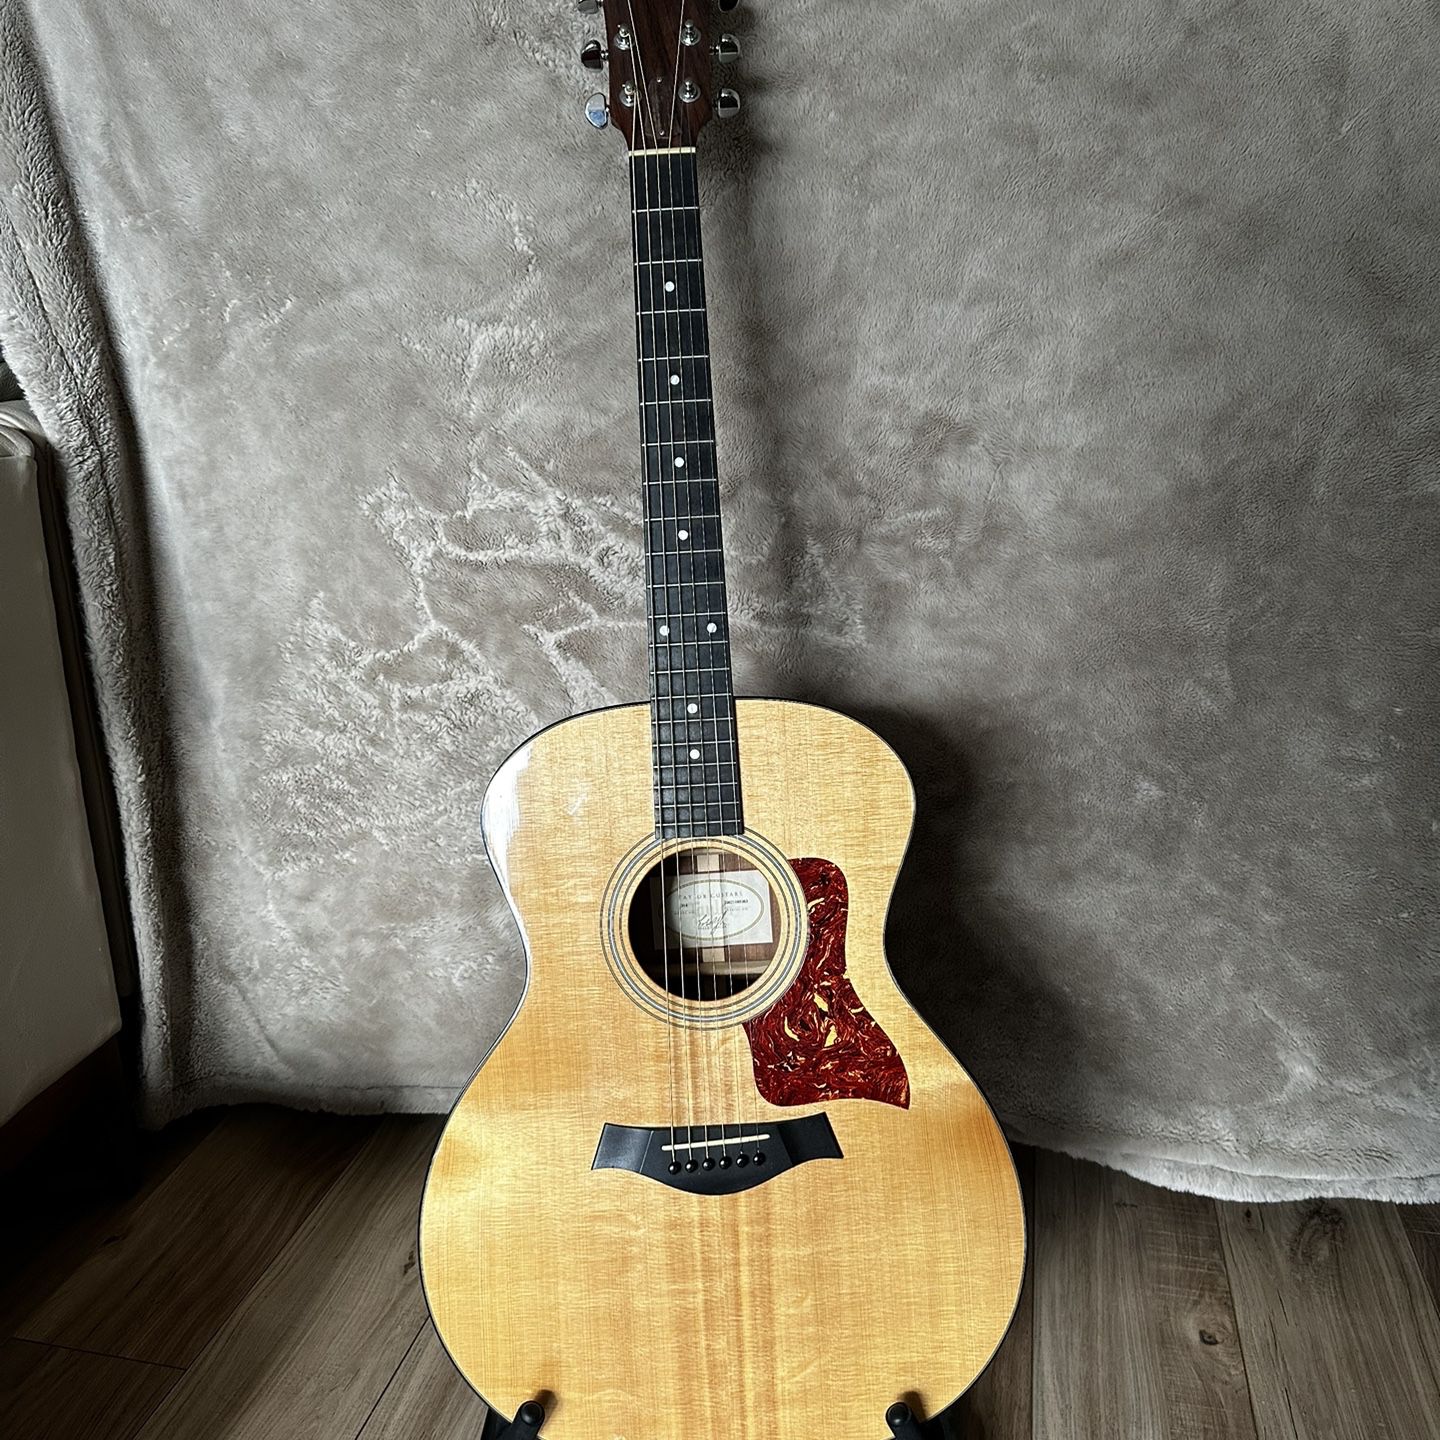 Taylor 314 Acoustic Guitar (Made In USA) for Sale in Puyallup, WA 